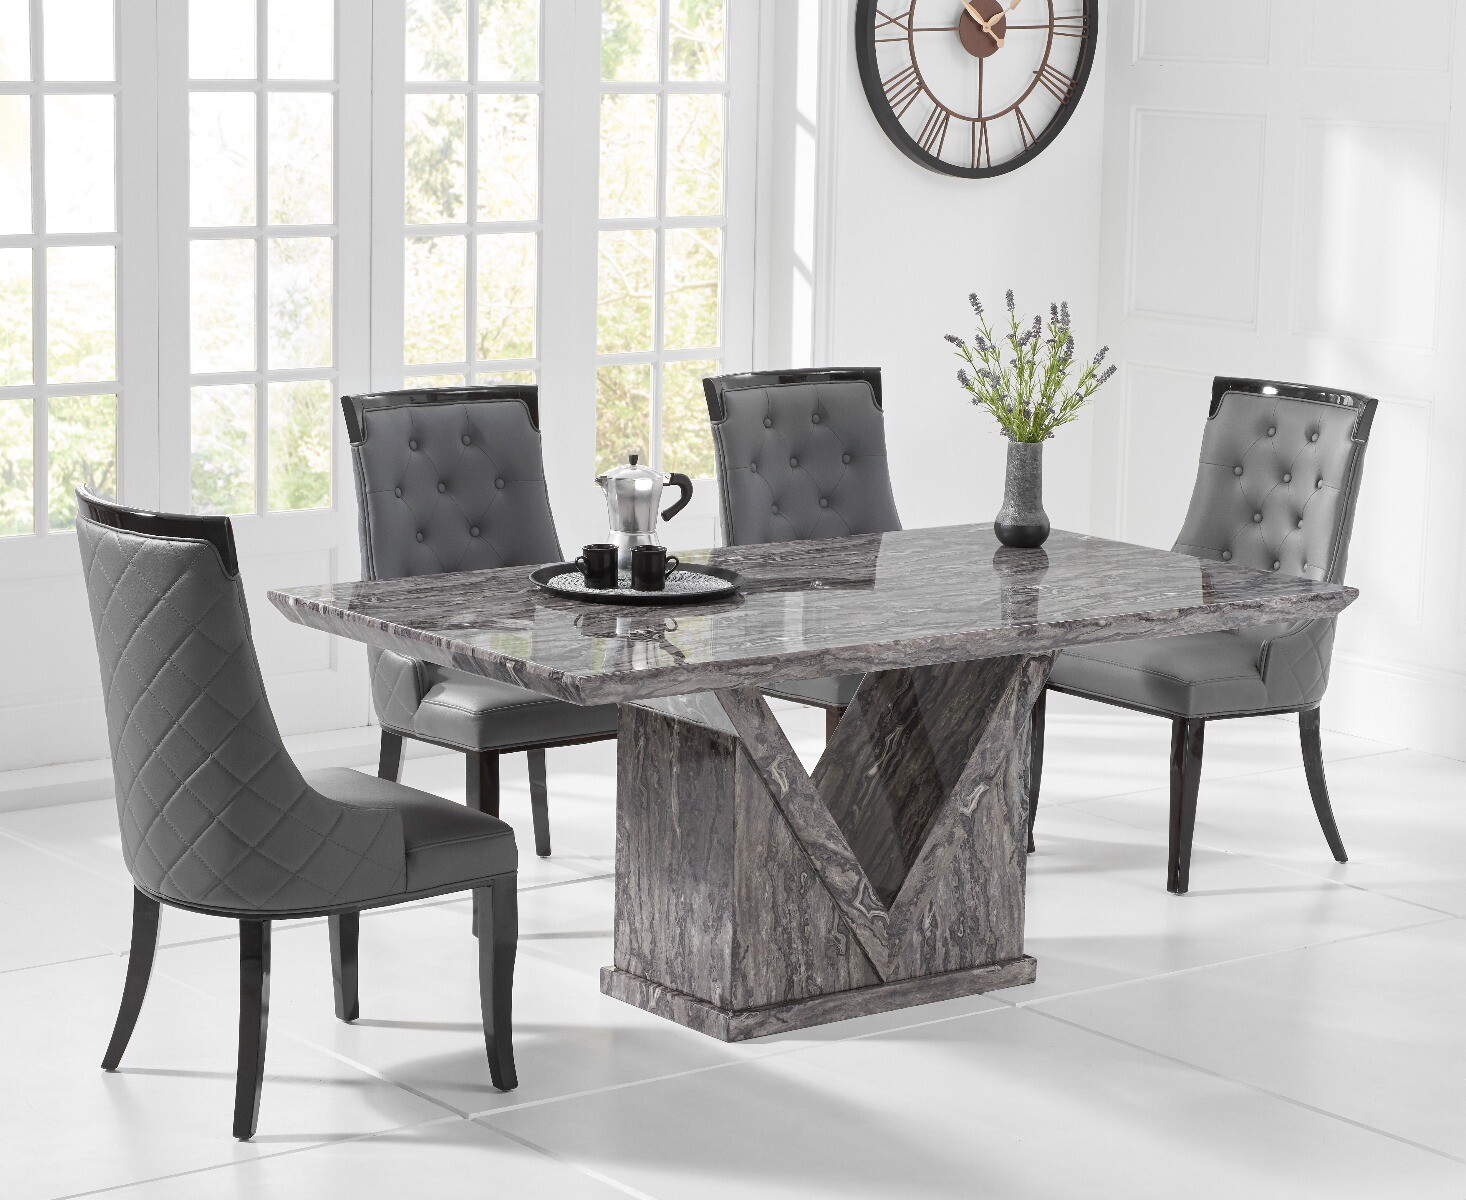 Photo 2 of Milan 160cm grey marble dining table with 6 grey francesca chairs